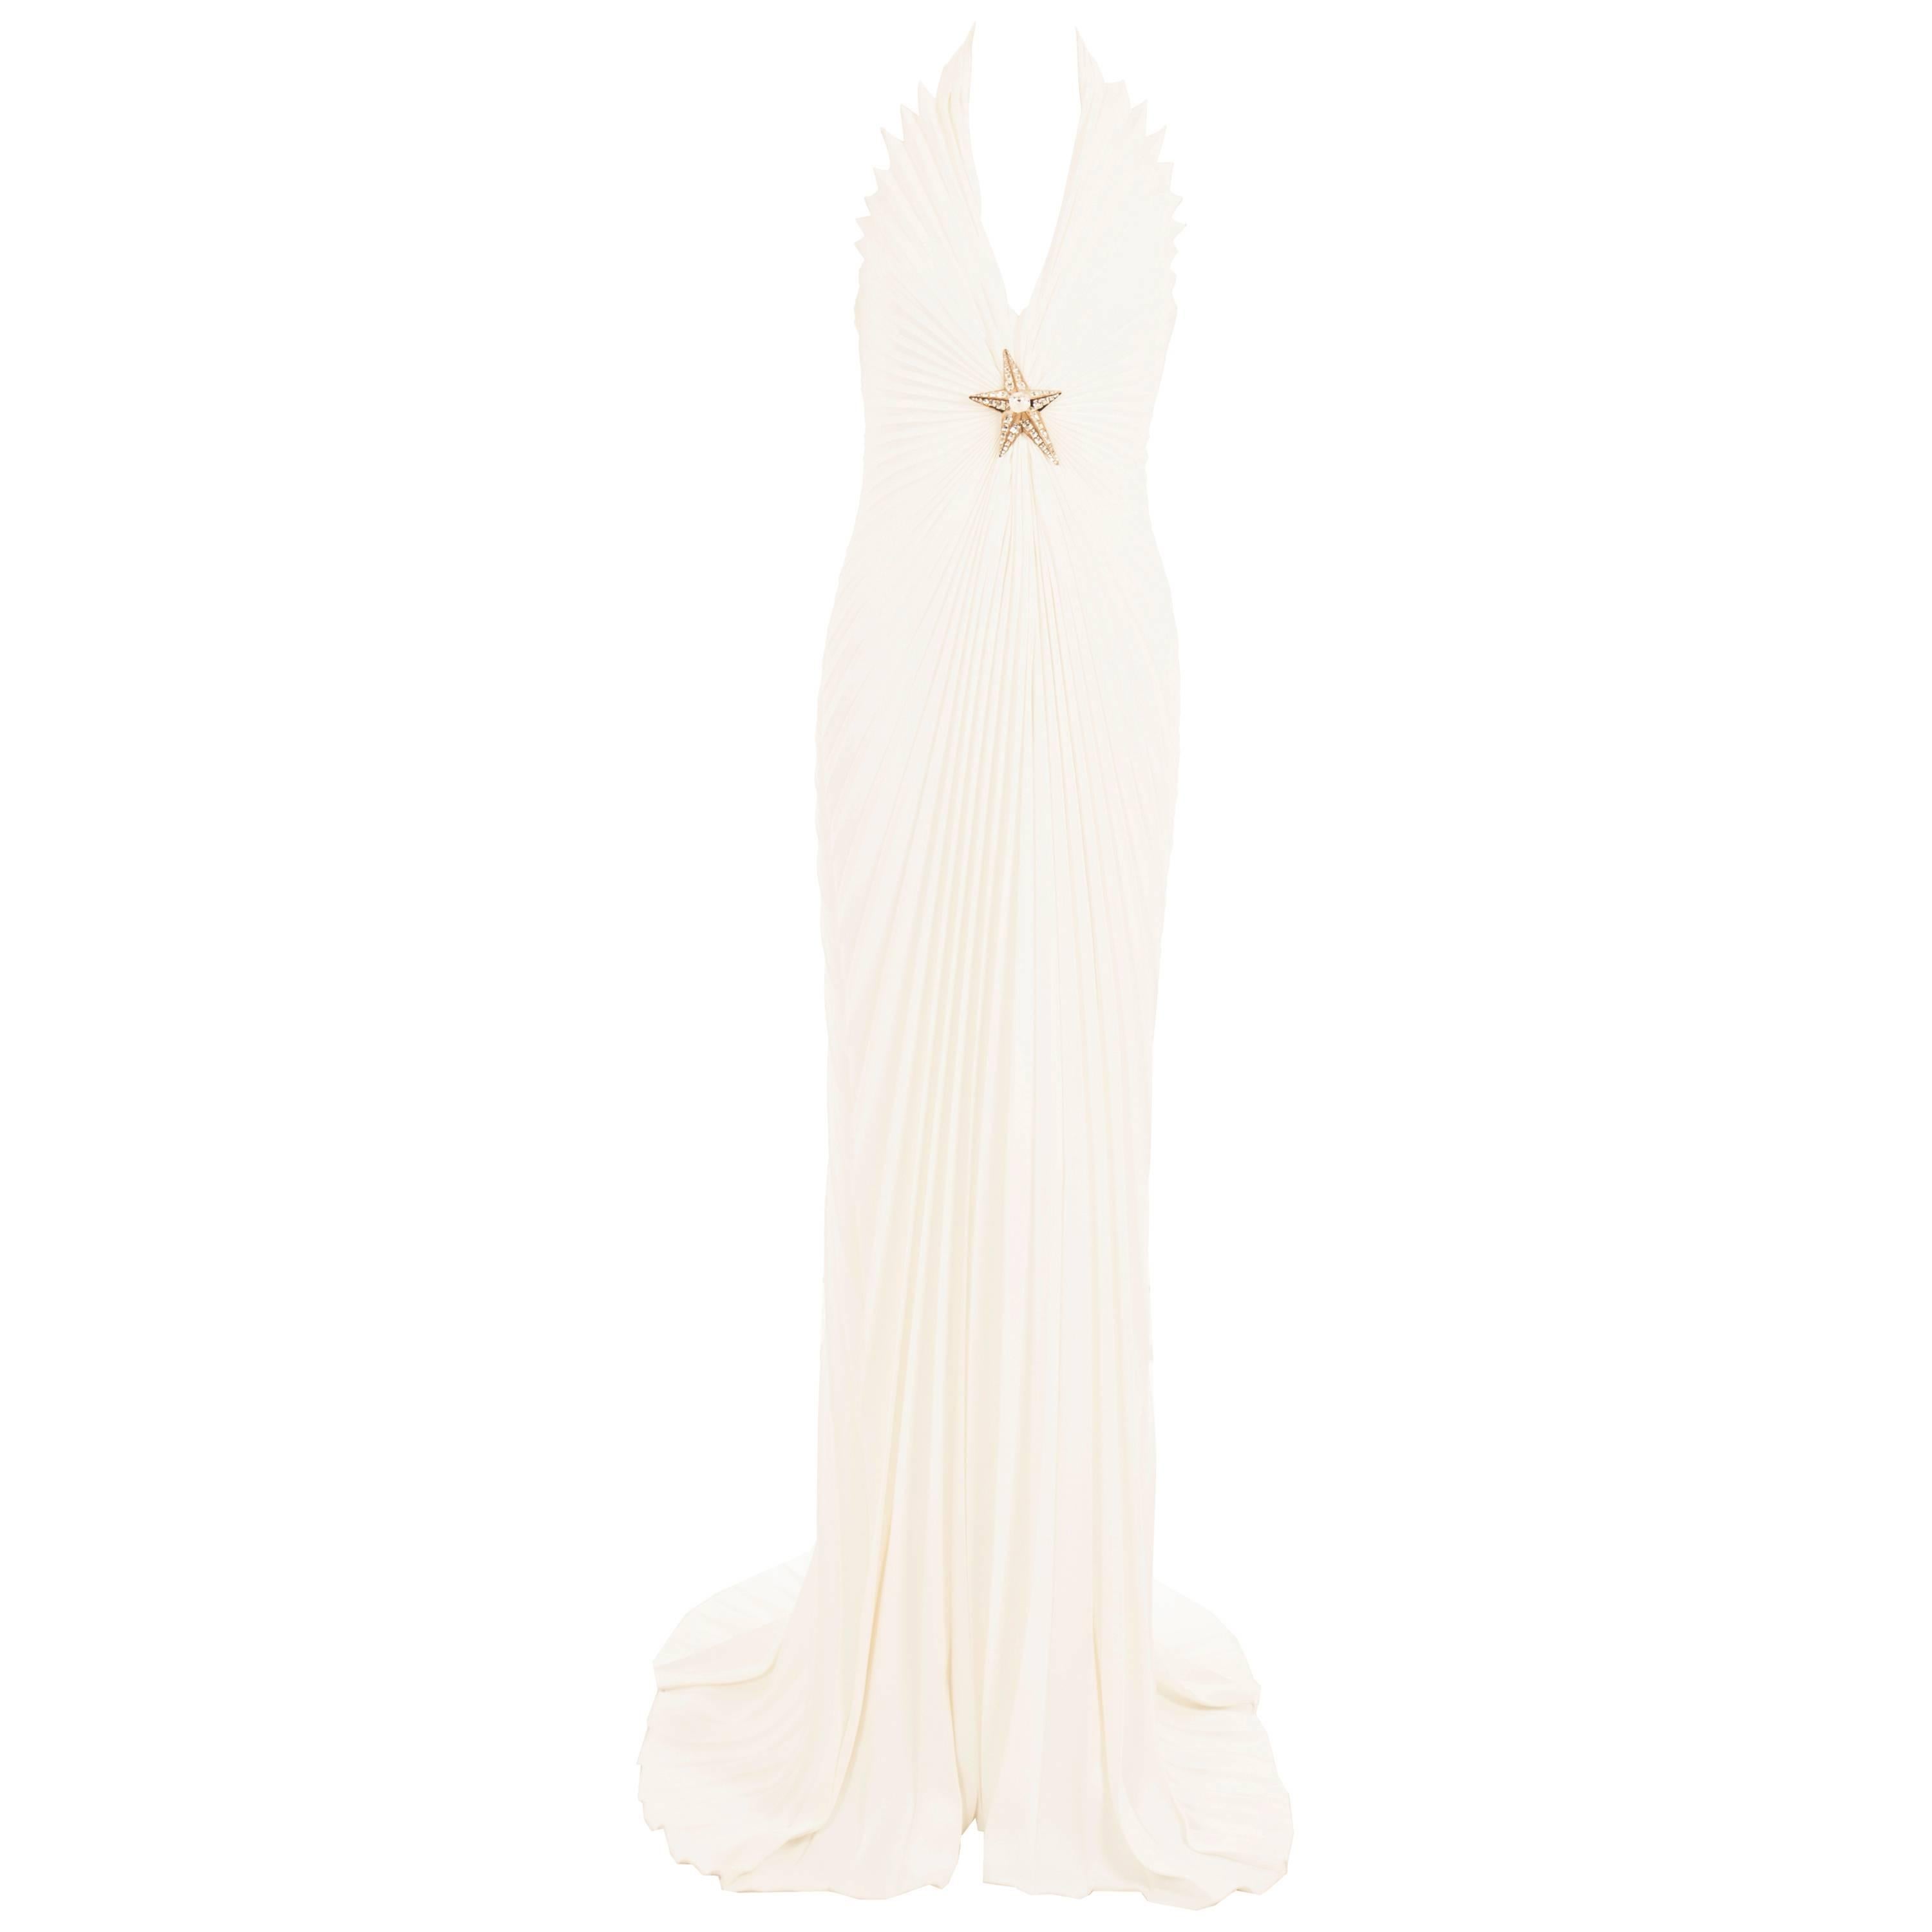 Conjuring images of Marilyn Monroe in her iconic white dress from ‘The Seven Year Itch’, this incredible Thierry Mugler halter neck gown screams red carpet glamour. The snow white polyester is pressed into accordion pleats and draped over the body